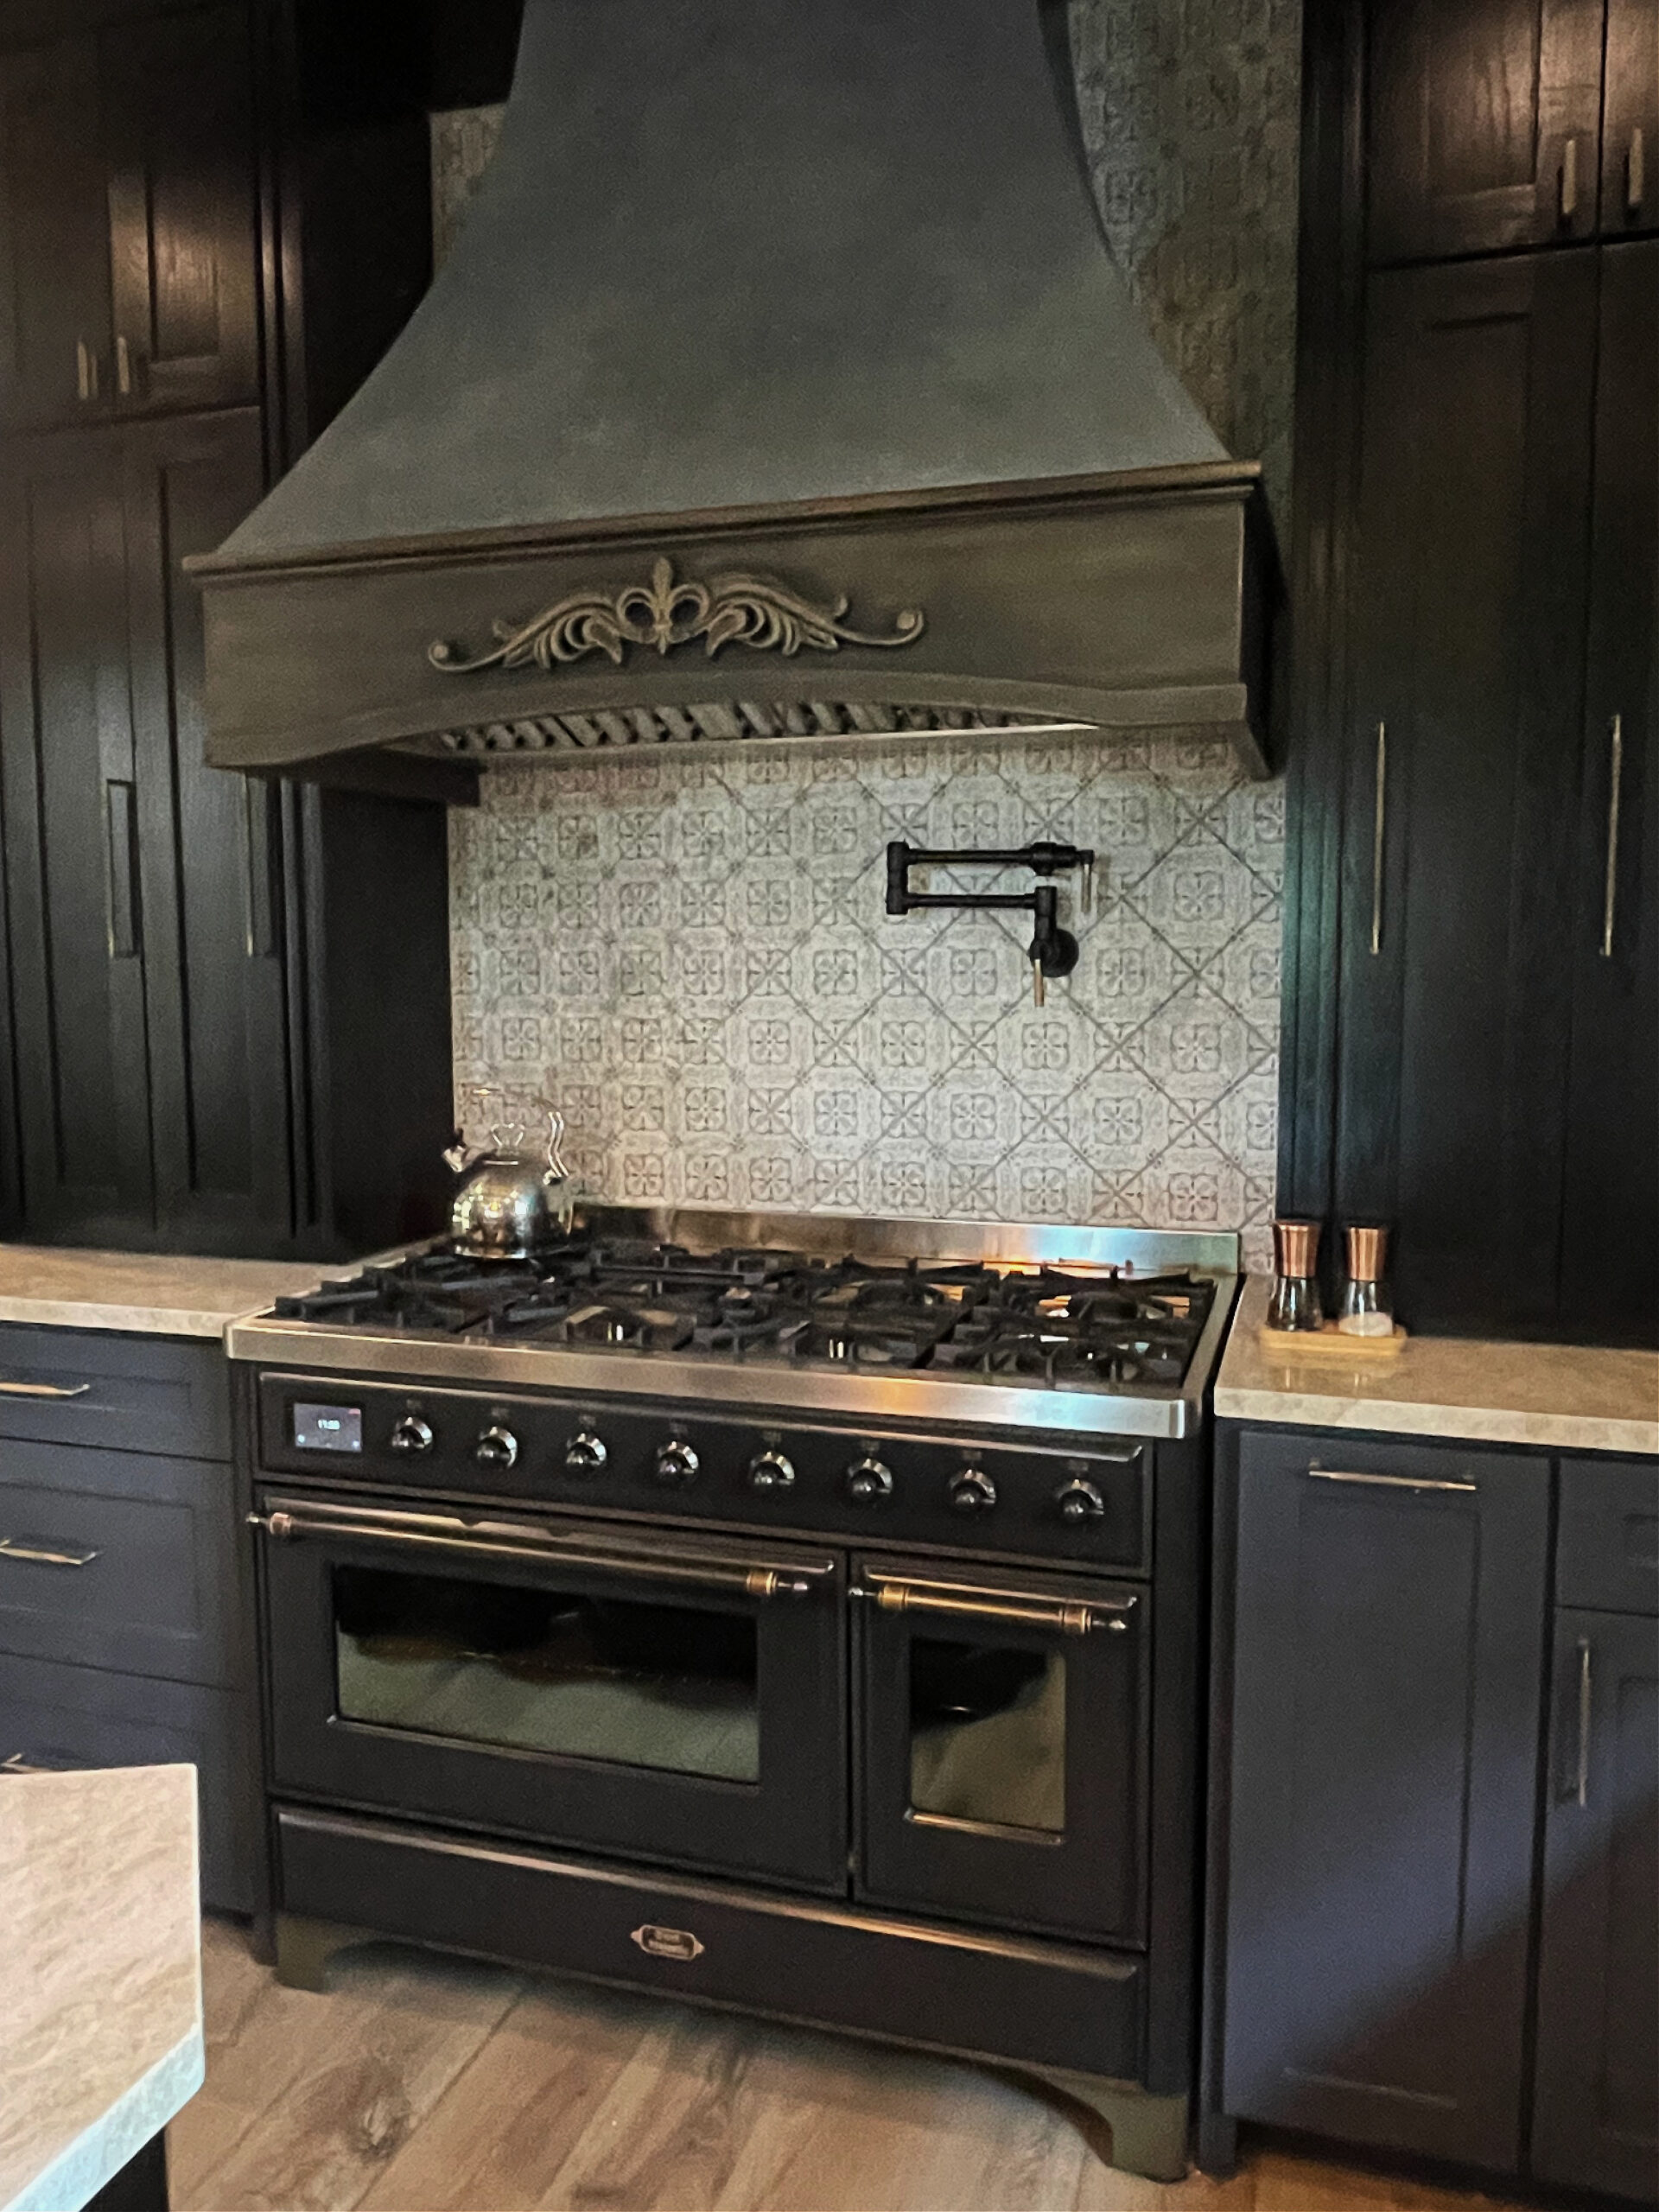 Best blue black paint color on kitchen cabinets, lowers, Benjamin Moore Mysterious, uppers dark stained wood, glazed range hood, gas stove, white oak. Kylie M ONline paint color consulting